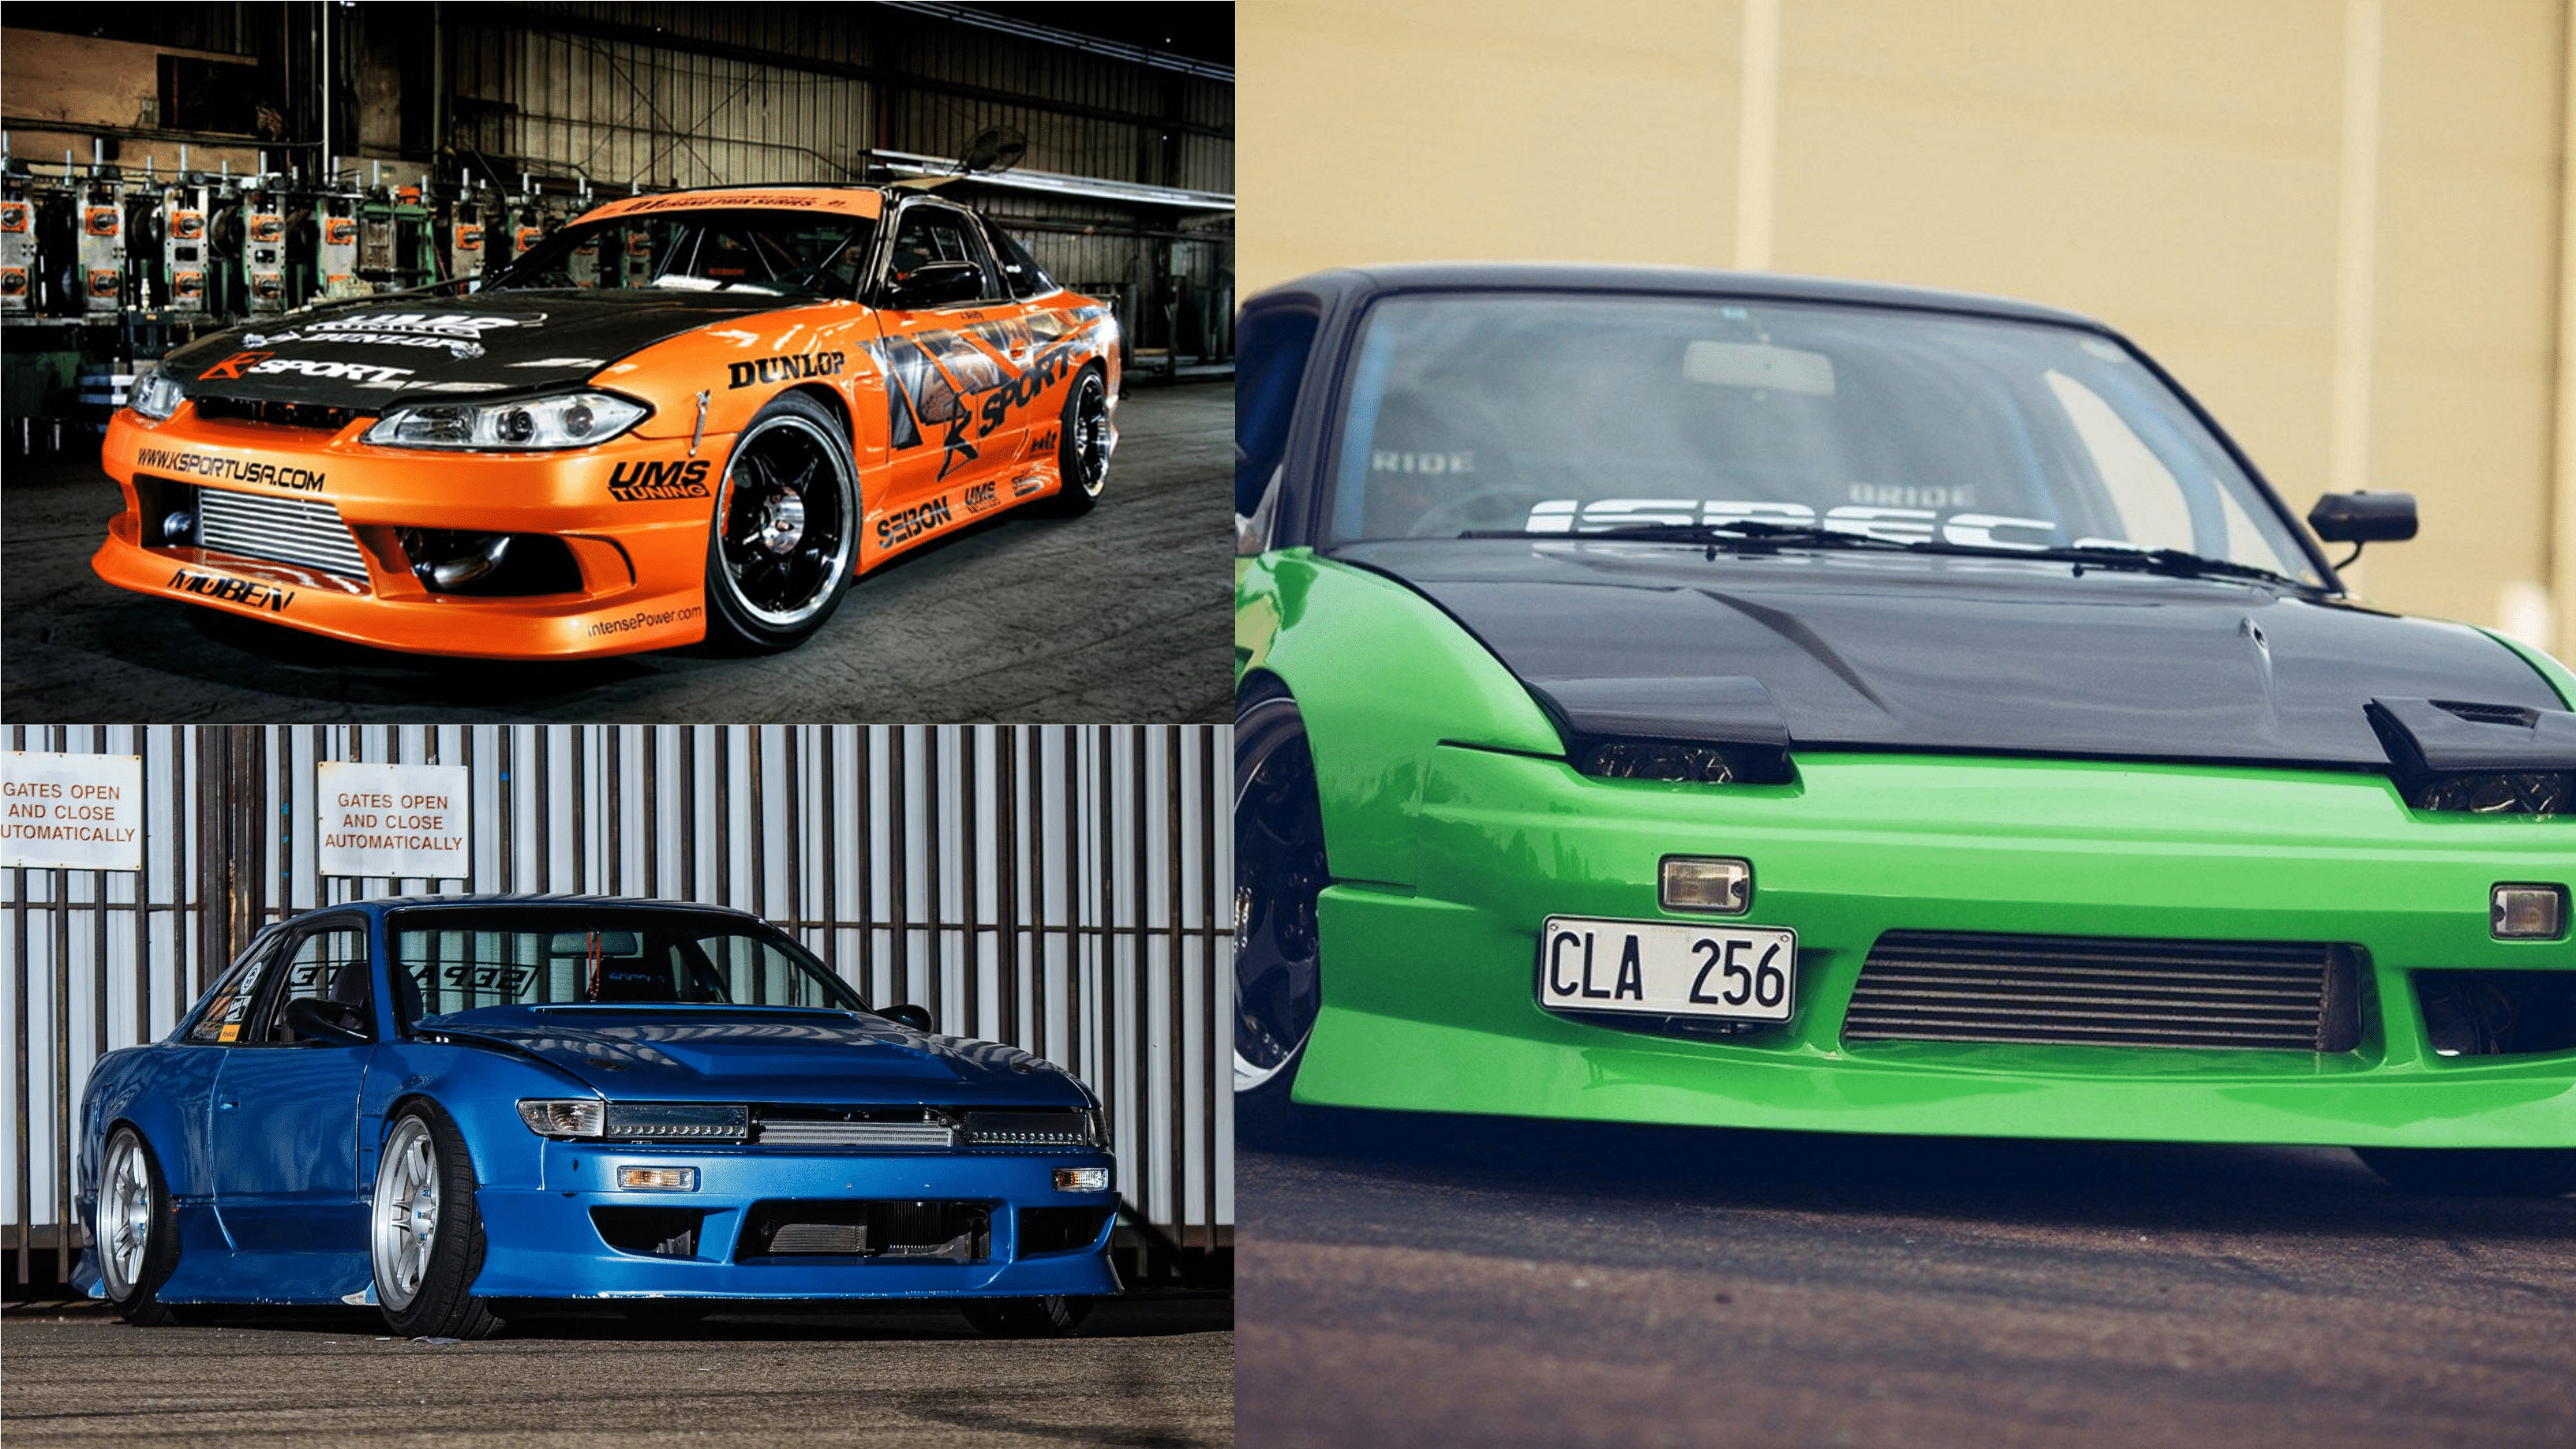 Modified Nissan 240SX variants